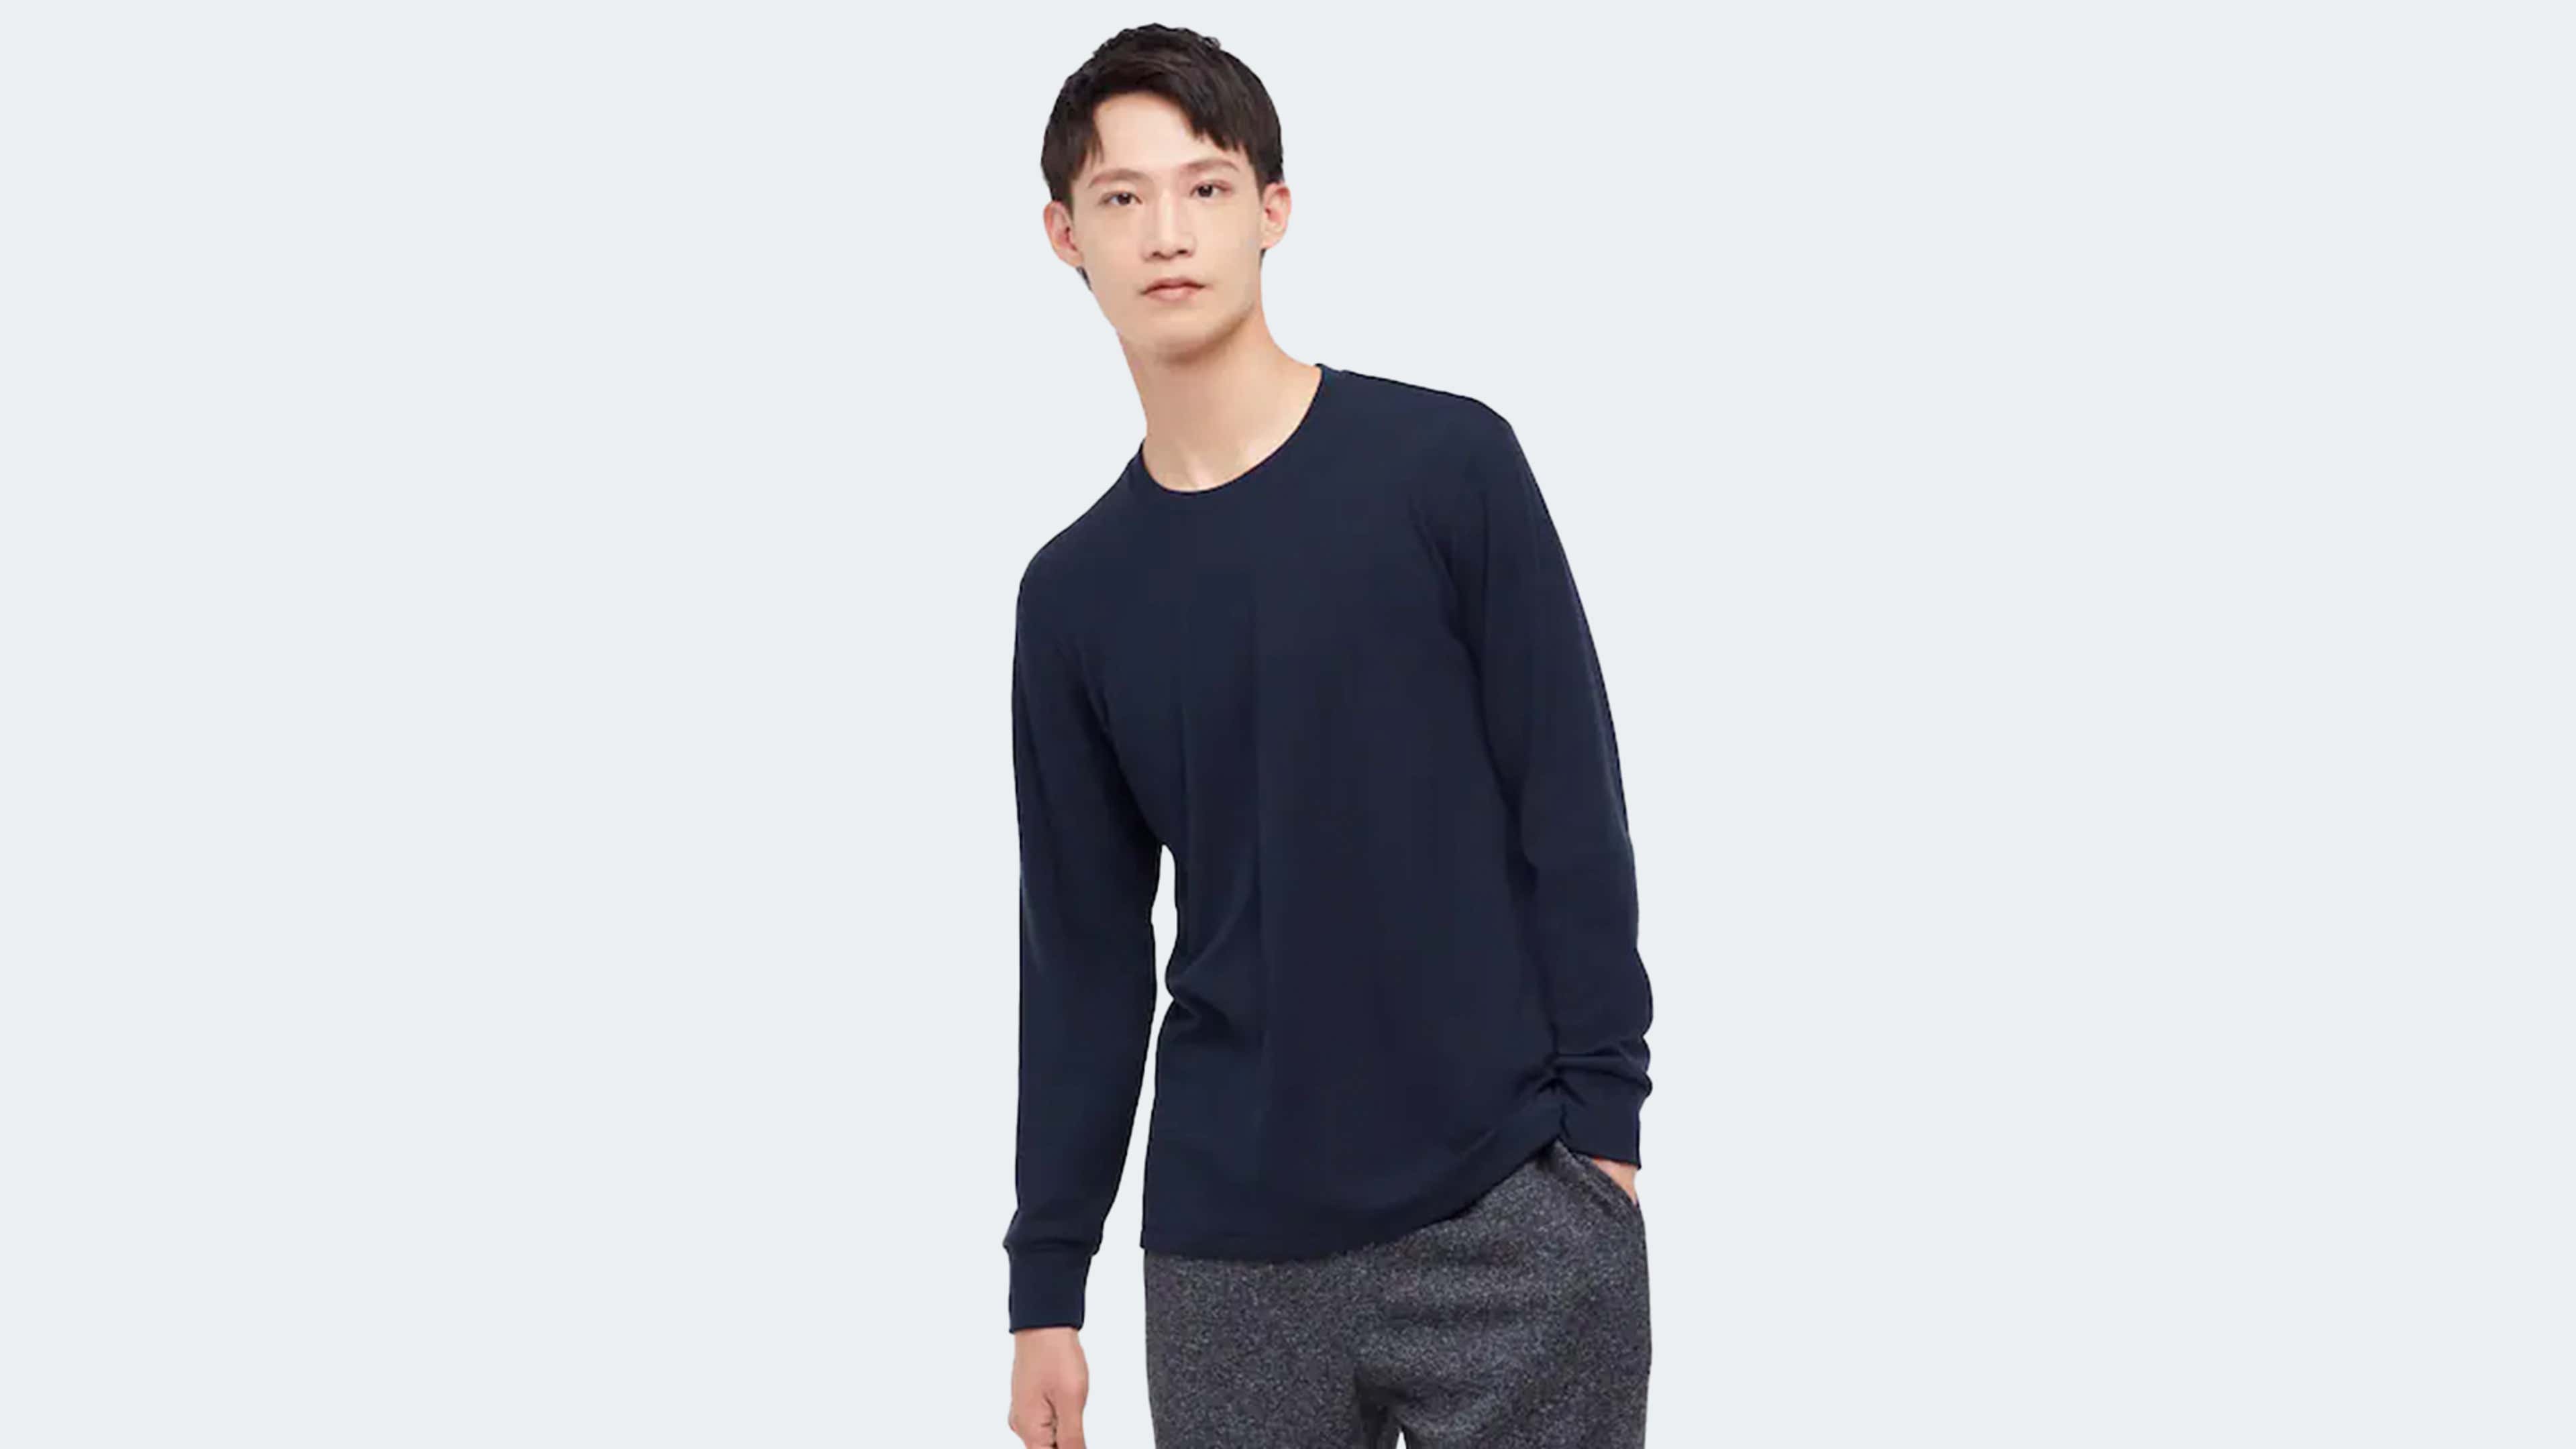 Uniqlo HeatTech T-Shirts - Functional, Stylish and Affordable